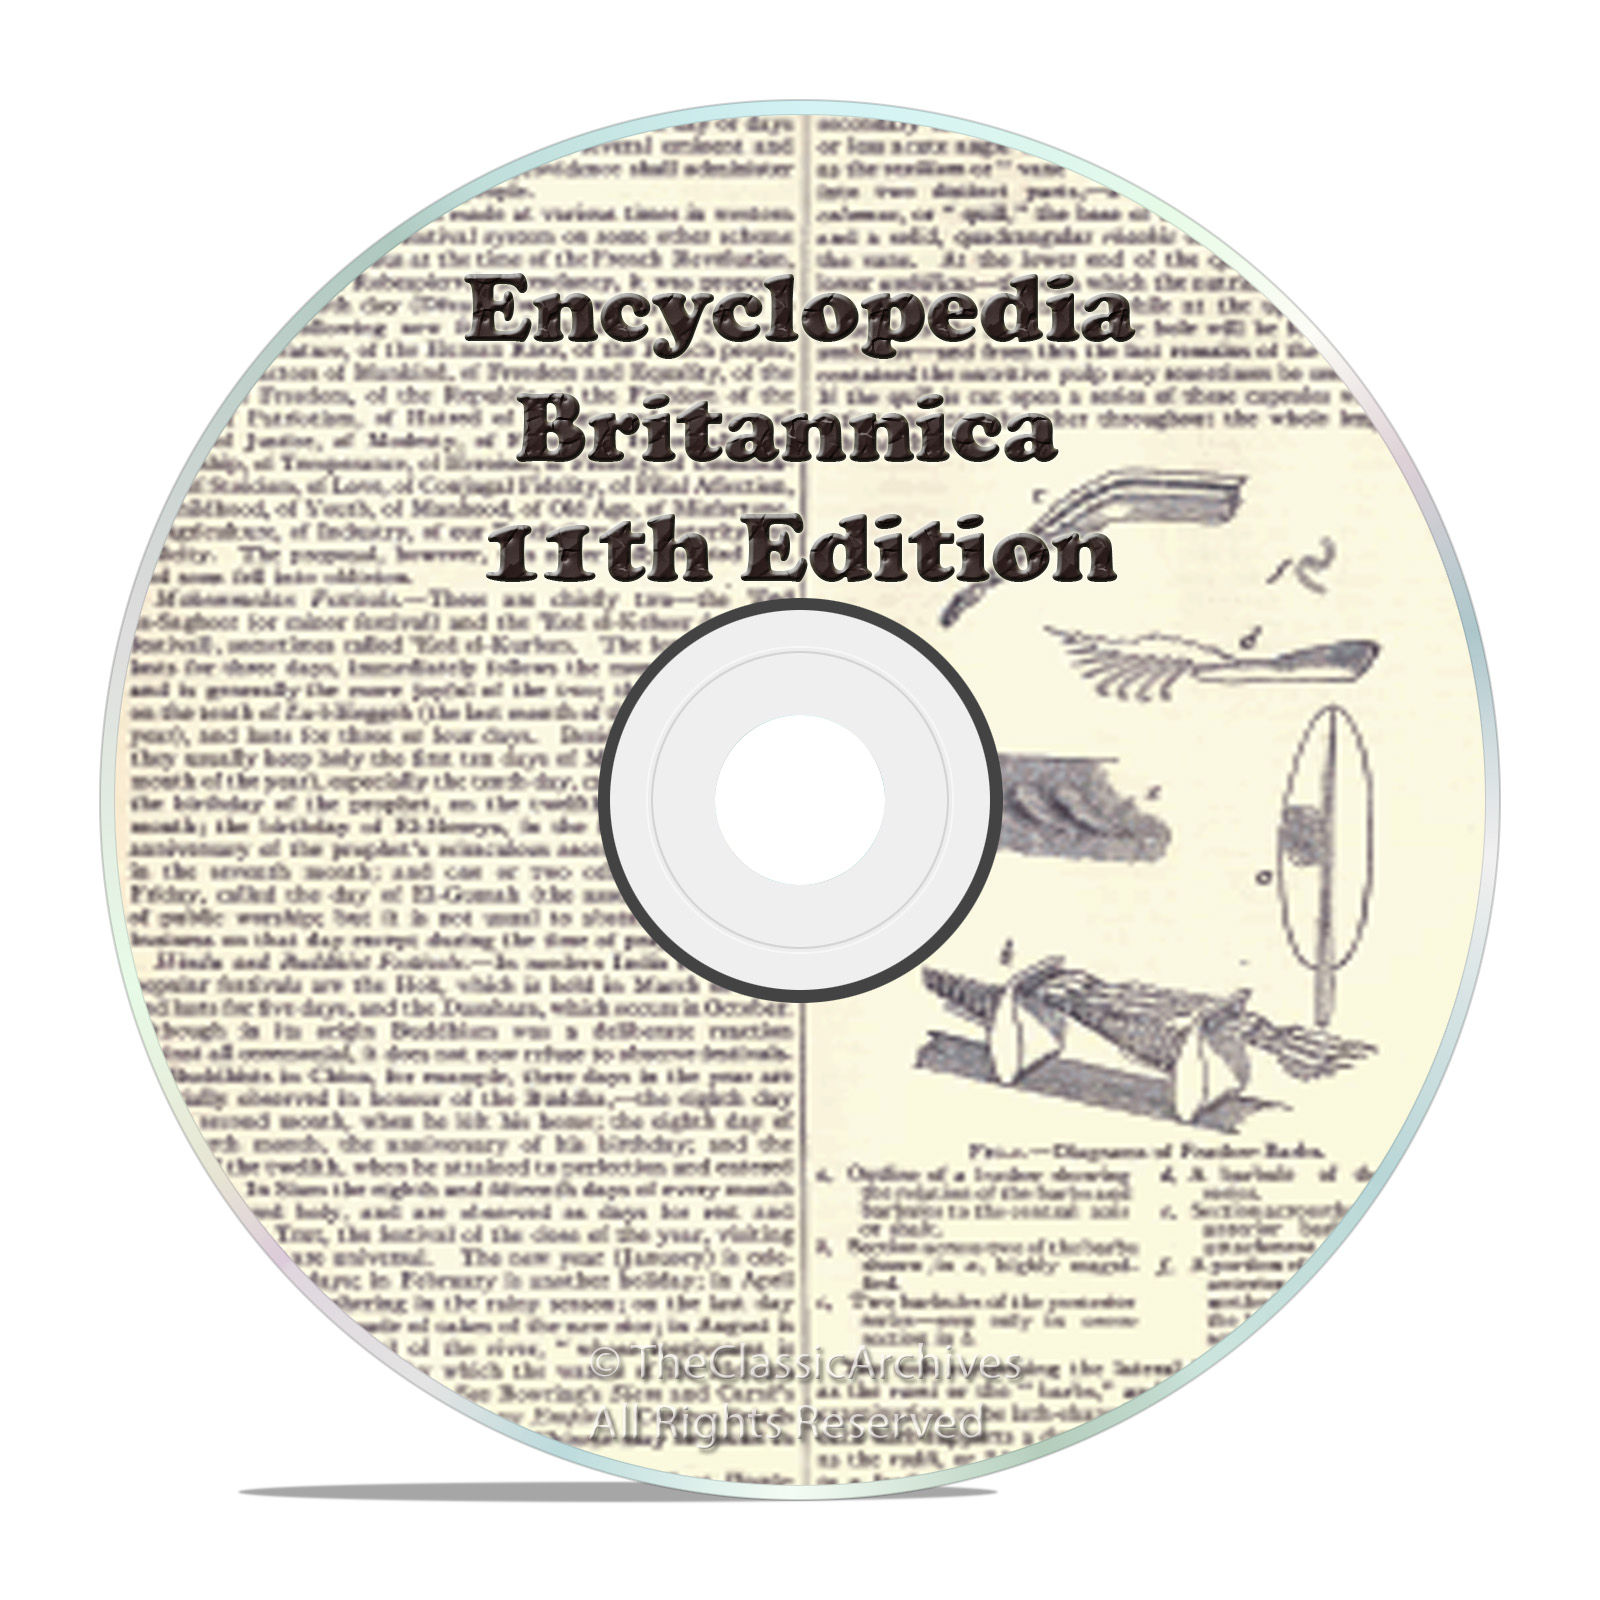 1911 11th Edition of Encyclopedia Britannica on one DVD - Snail Mail